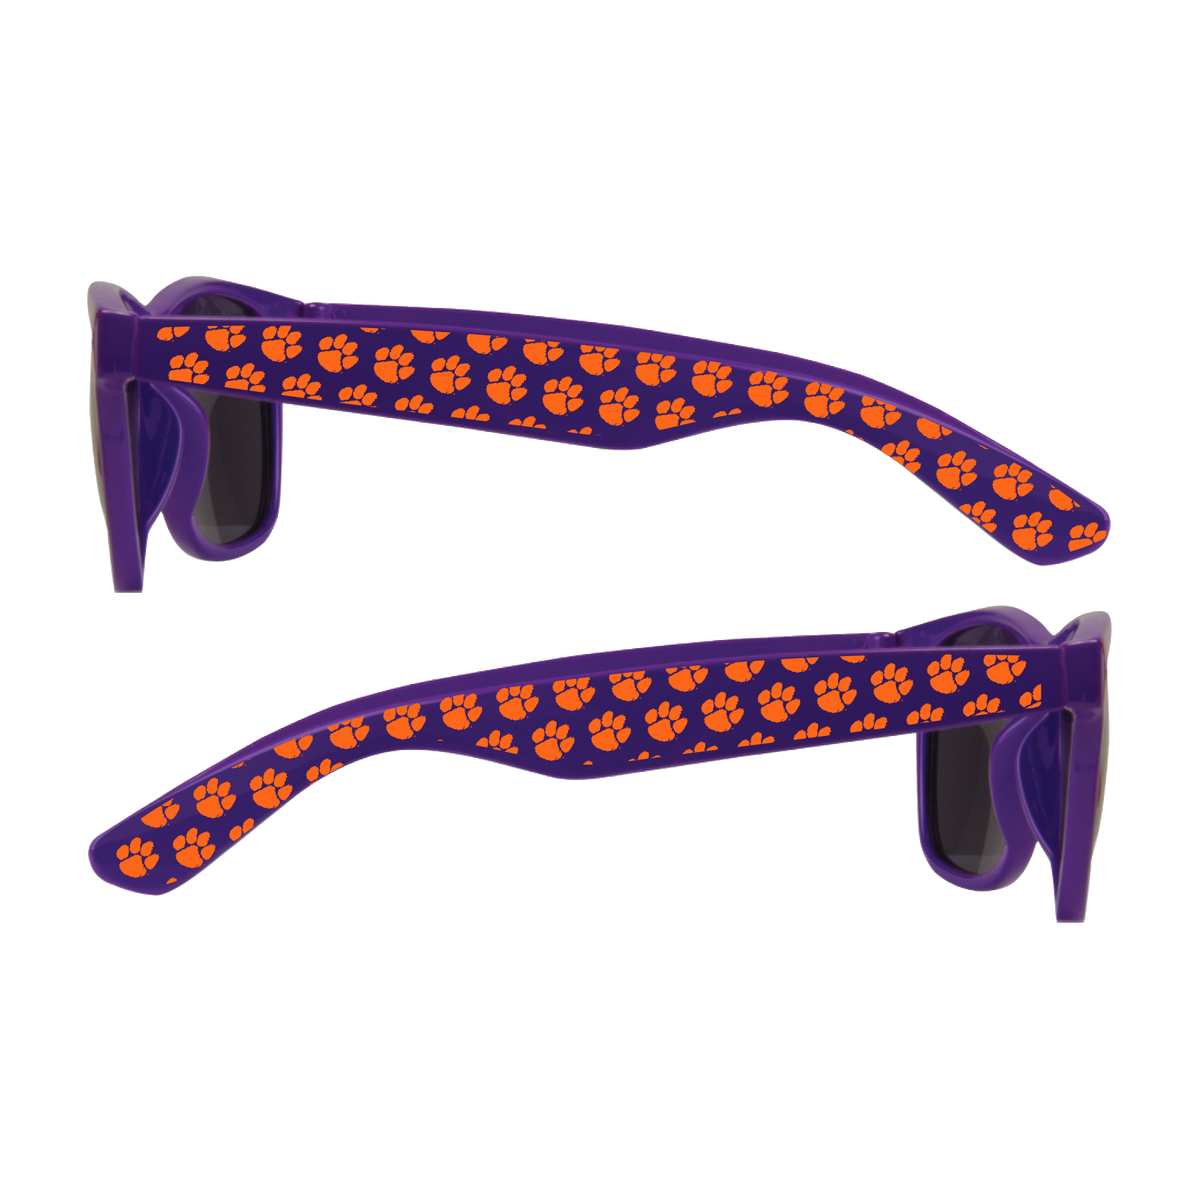 Clemson Repeating Paw Campus Shades